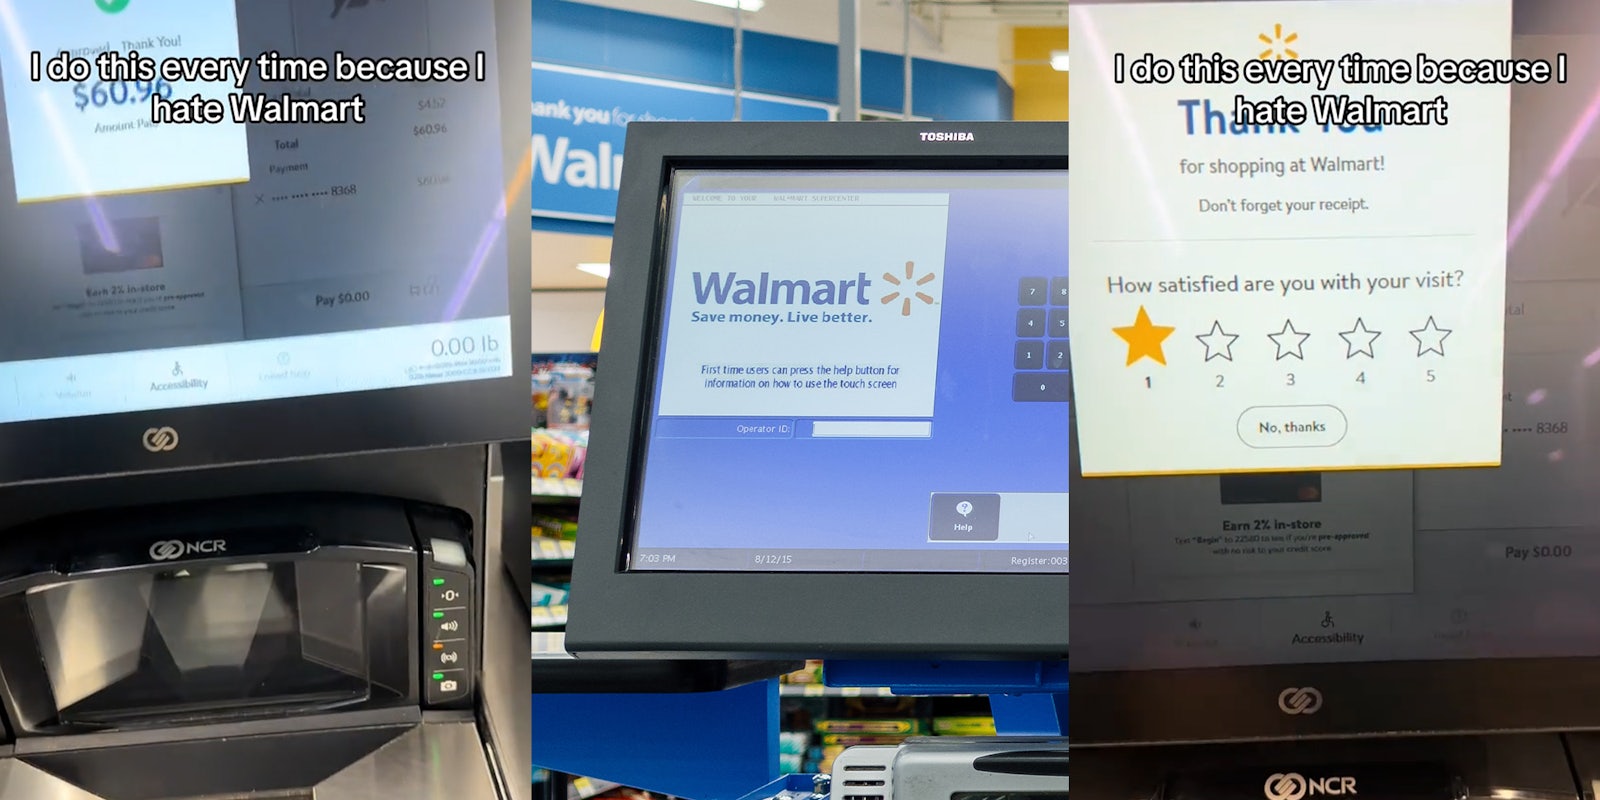 Walmart customer says they give 1 star at self-checkout because they ‘hate Walmart’